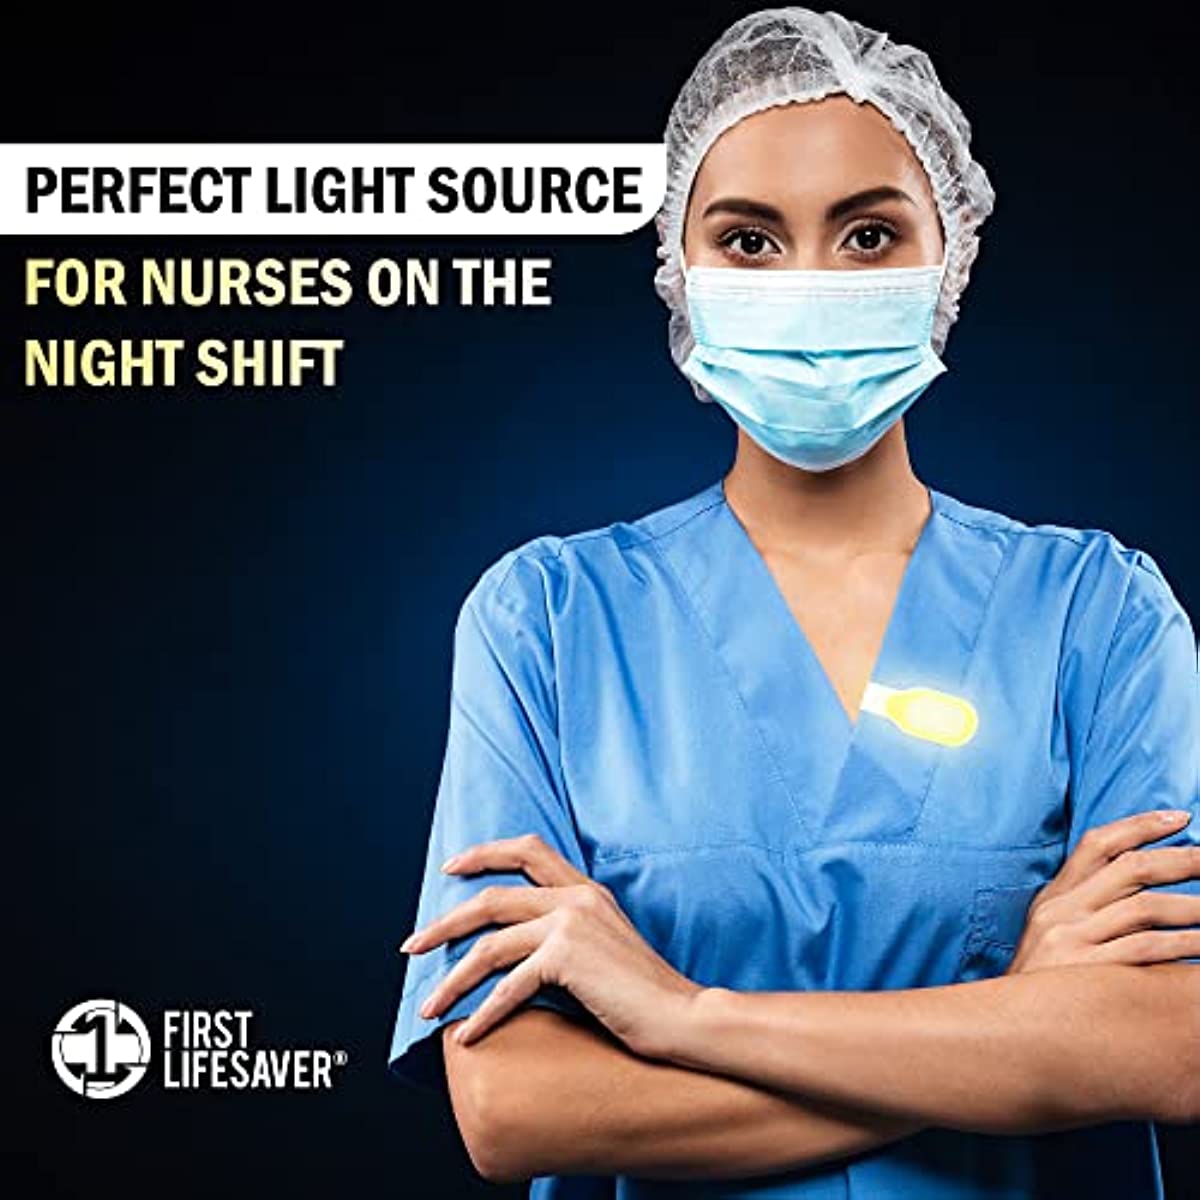 First Lifesaver LED Flashlight Clip On Nursing Night Light Hands Free Strong Magnetic Grip for Night Shift (Yellow)